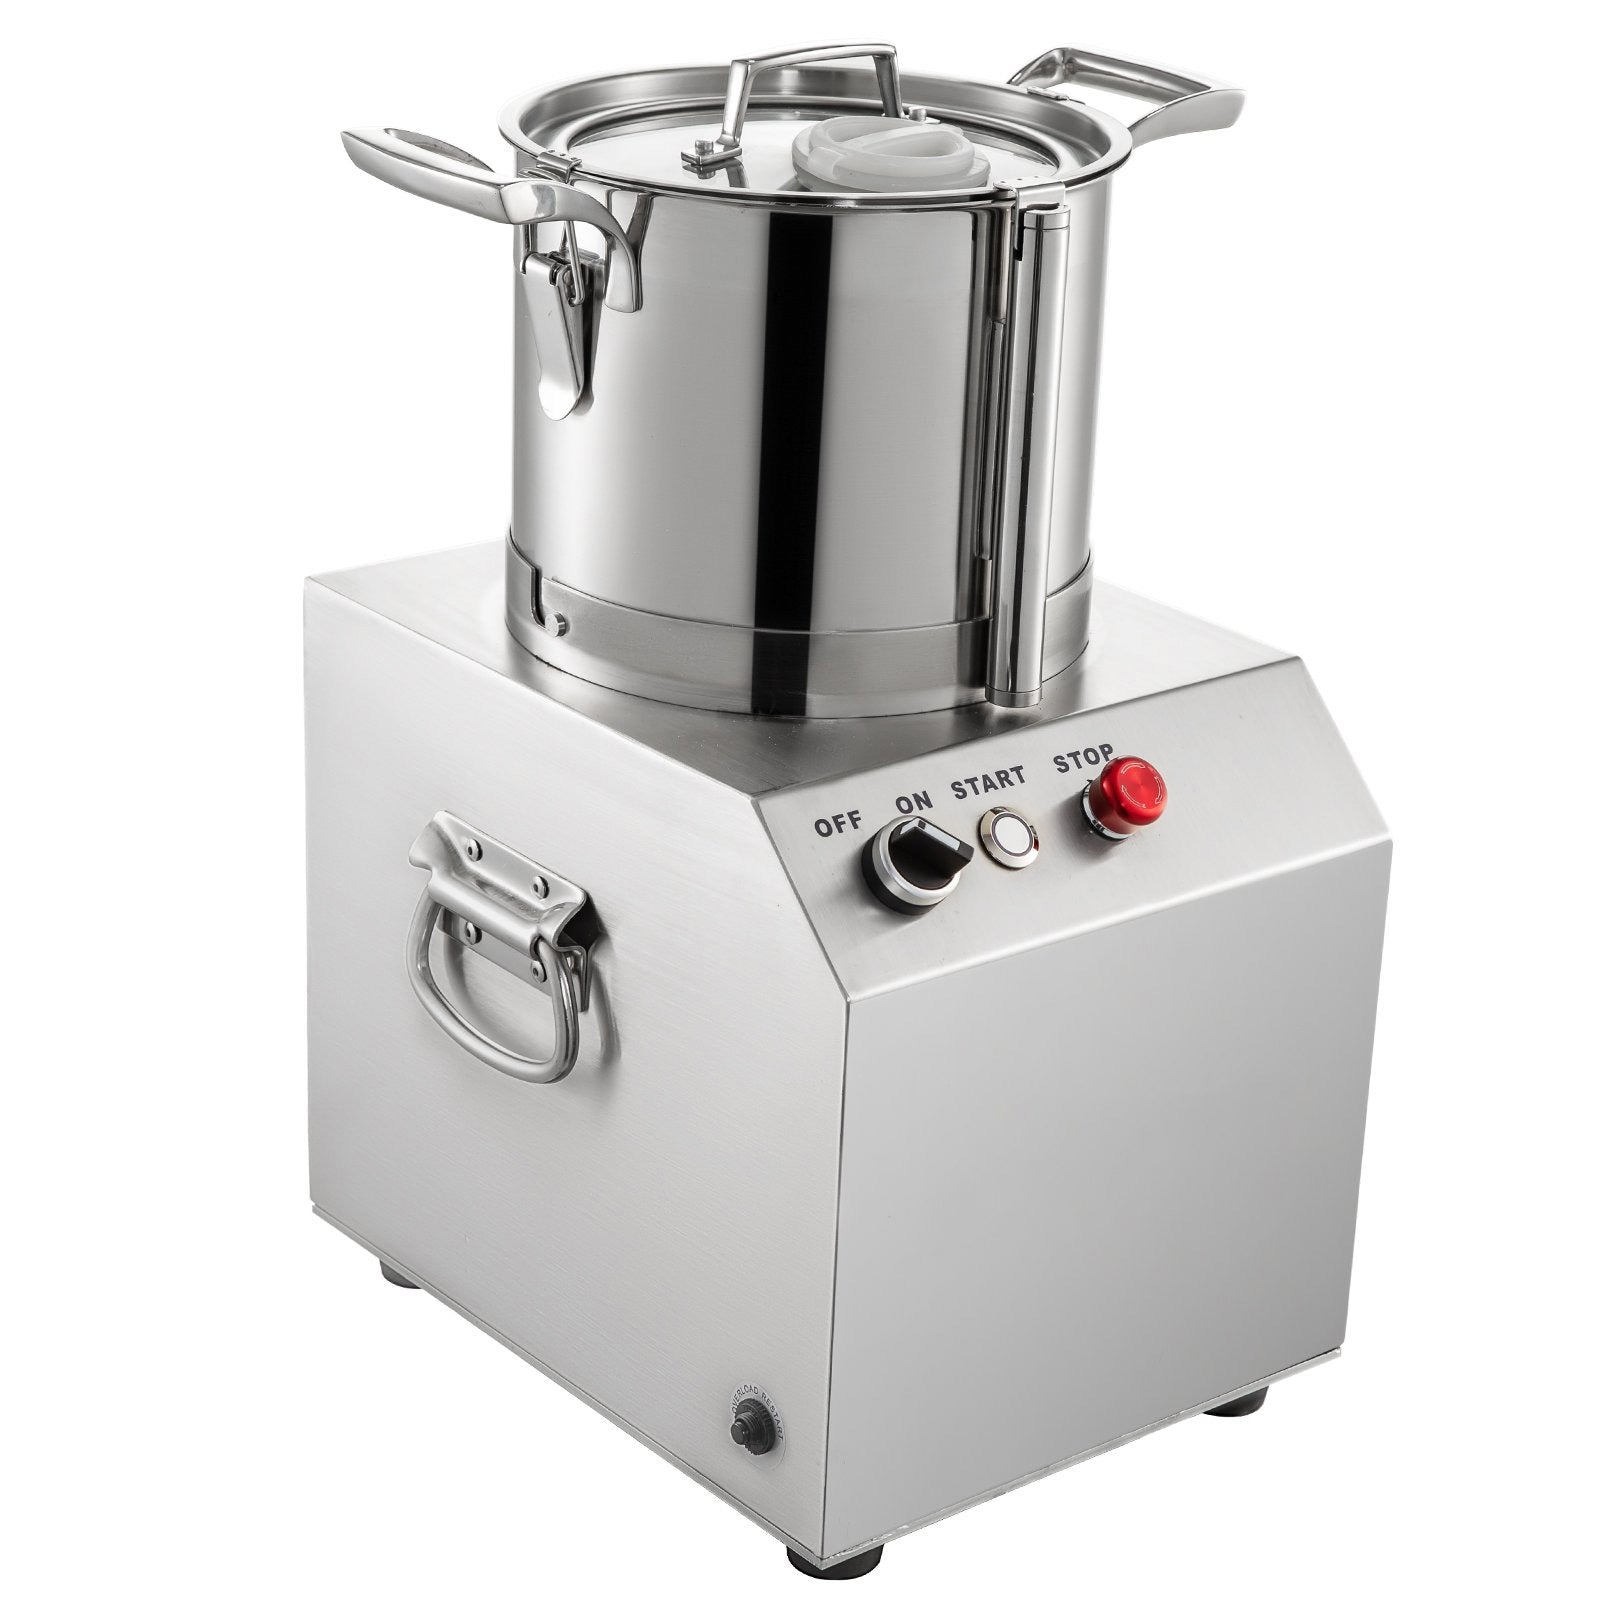 A-QS804 Food Chopper | 4 L | Electric Food Processor | Stainless Steel | 1400RPM Motor | Wide Application